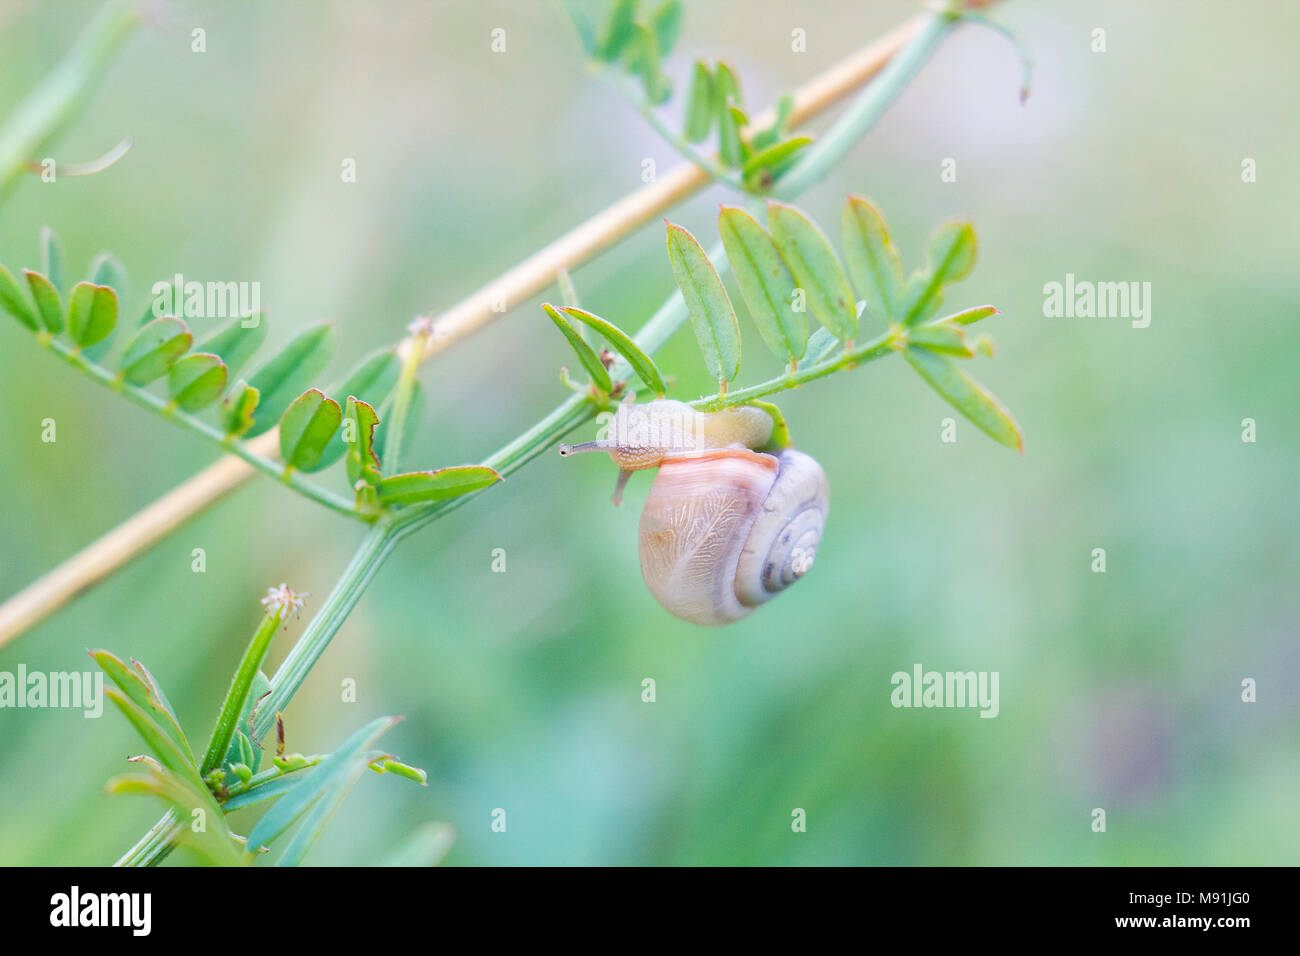 Snail crawling on plant. Small Snail in nature, pastel colors Stock Photo